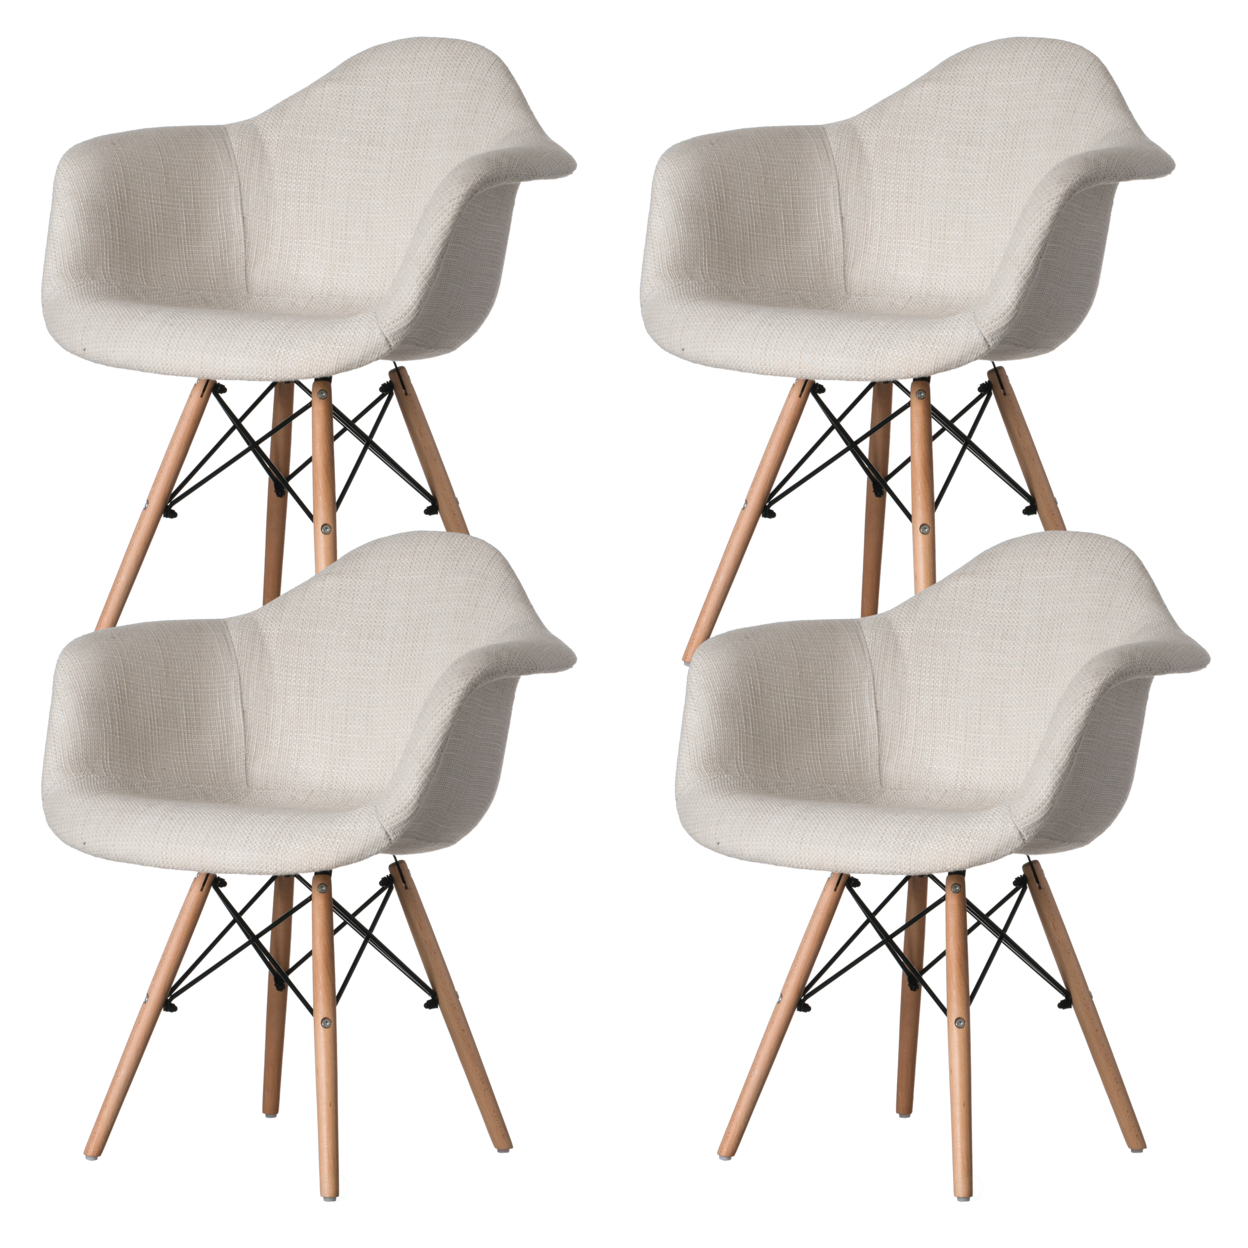 Mid-Century Modern Style Fabric Lined Armchair with Beech Wooden Legs - White Set of 4